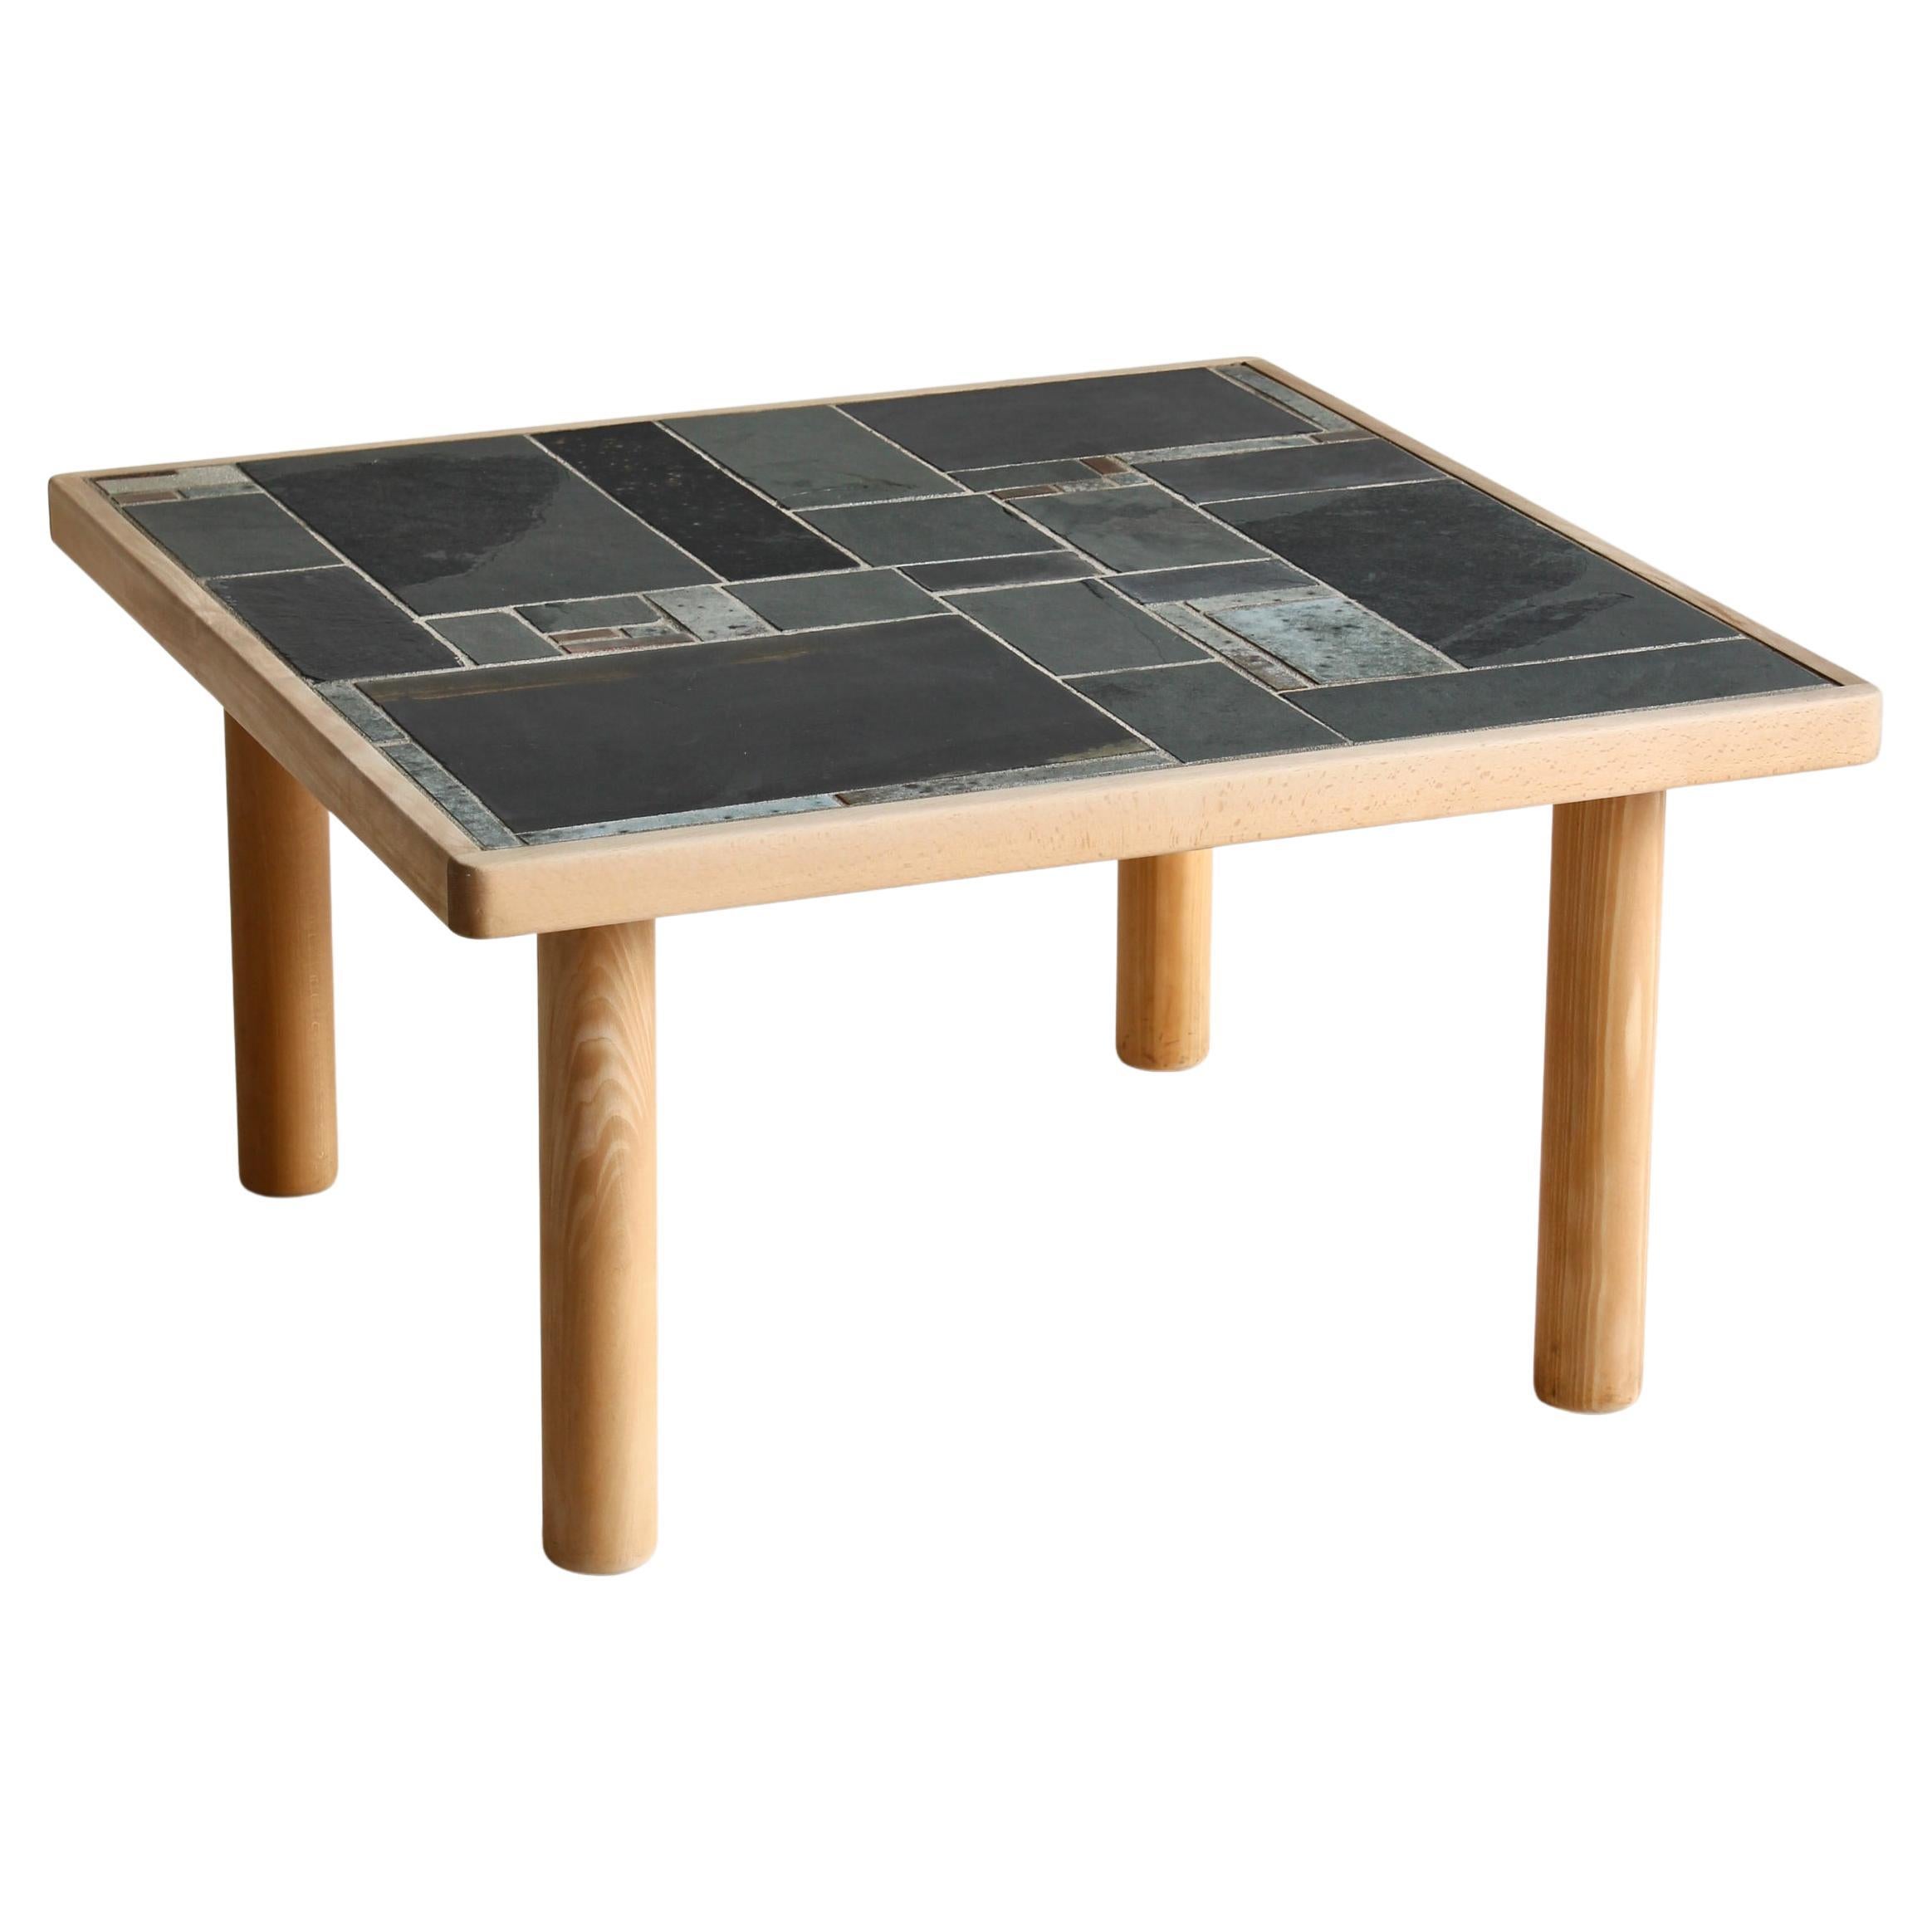 Square Coffee Table in Beechwood and Ceramic Tiles by Sallingboe, Denmark, 1970s For Sale